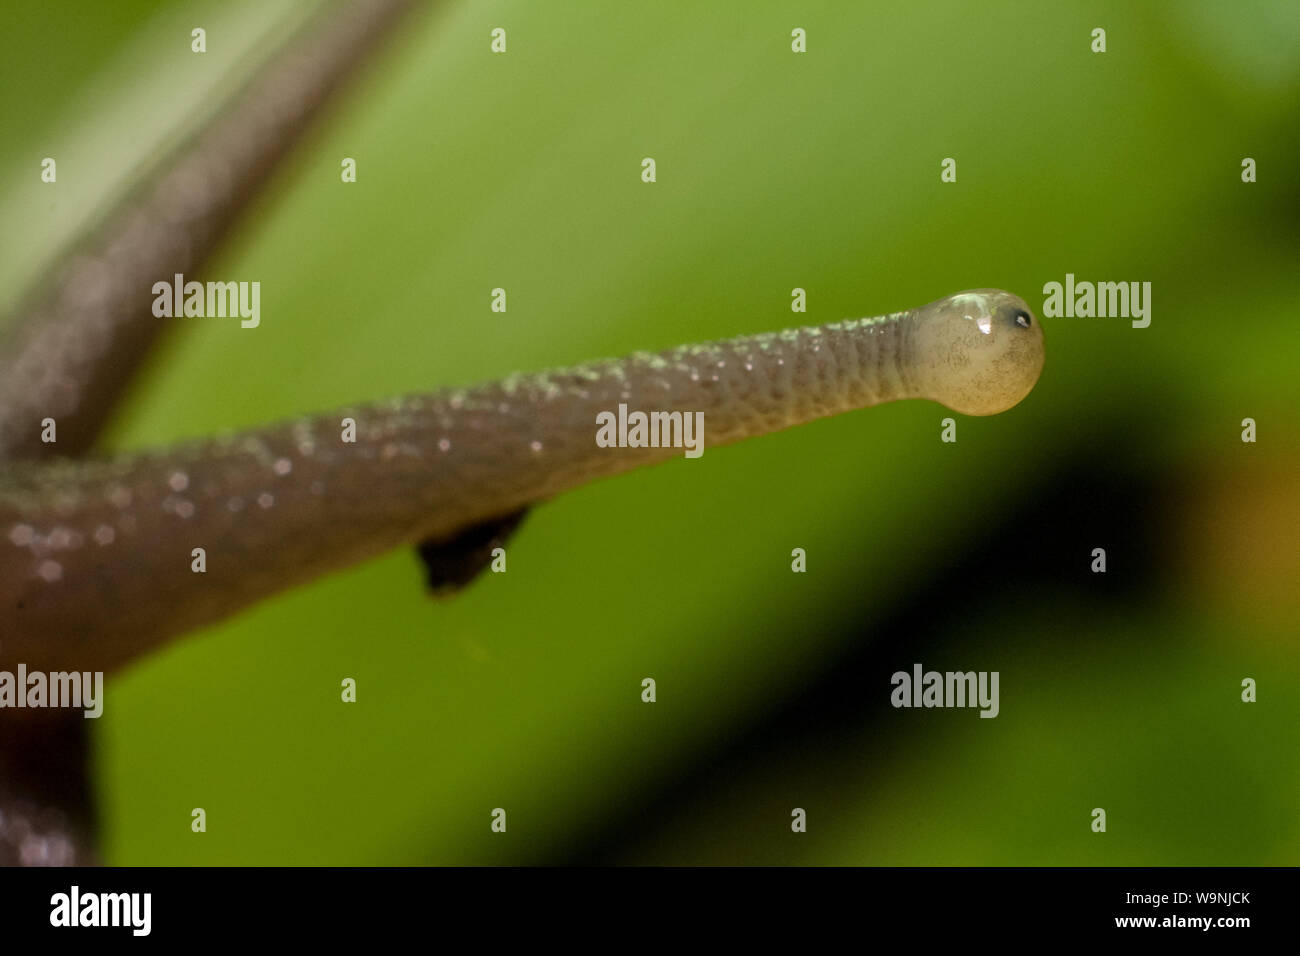 Extreme close-up of a slug with details on the mollusk eyes Stock Photo